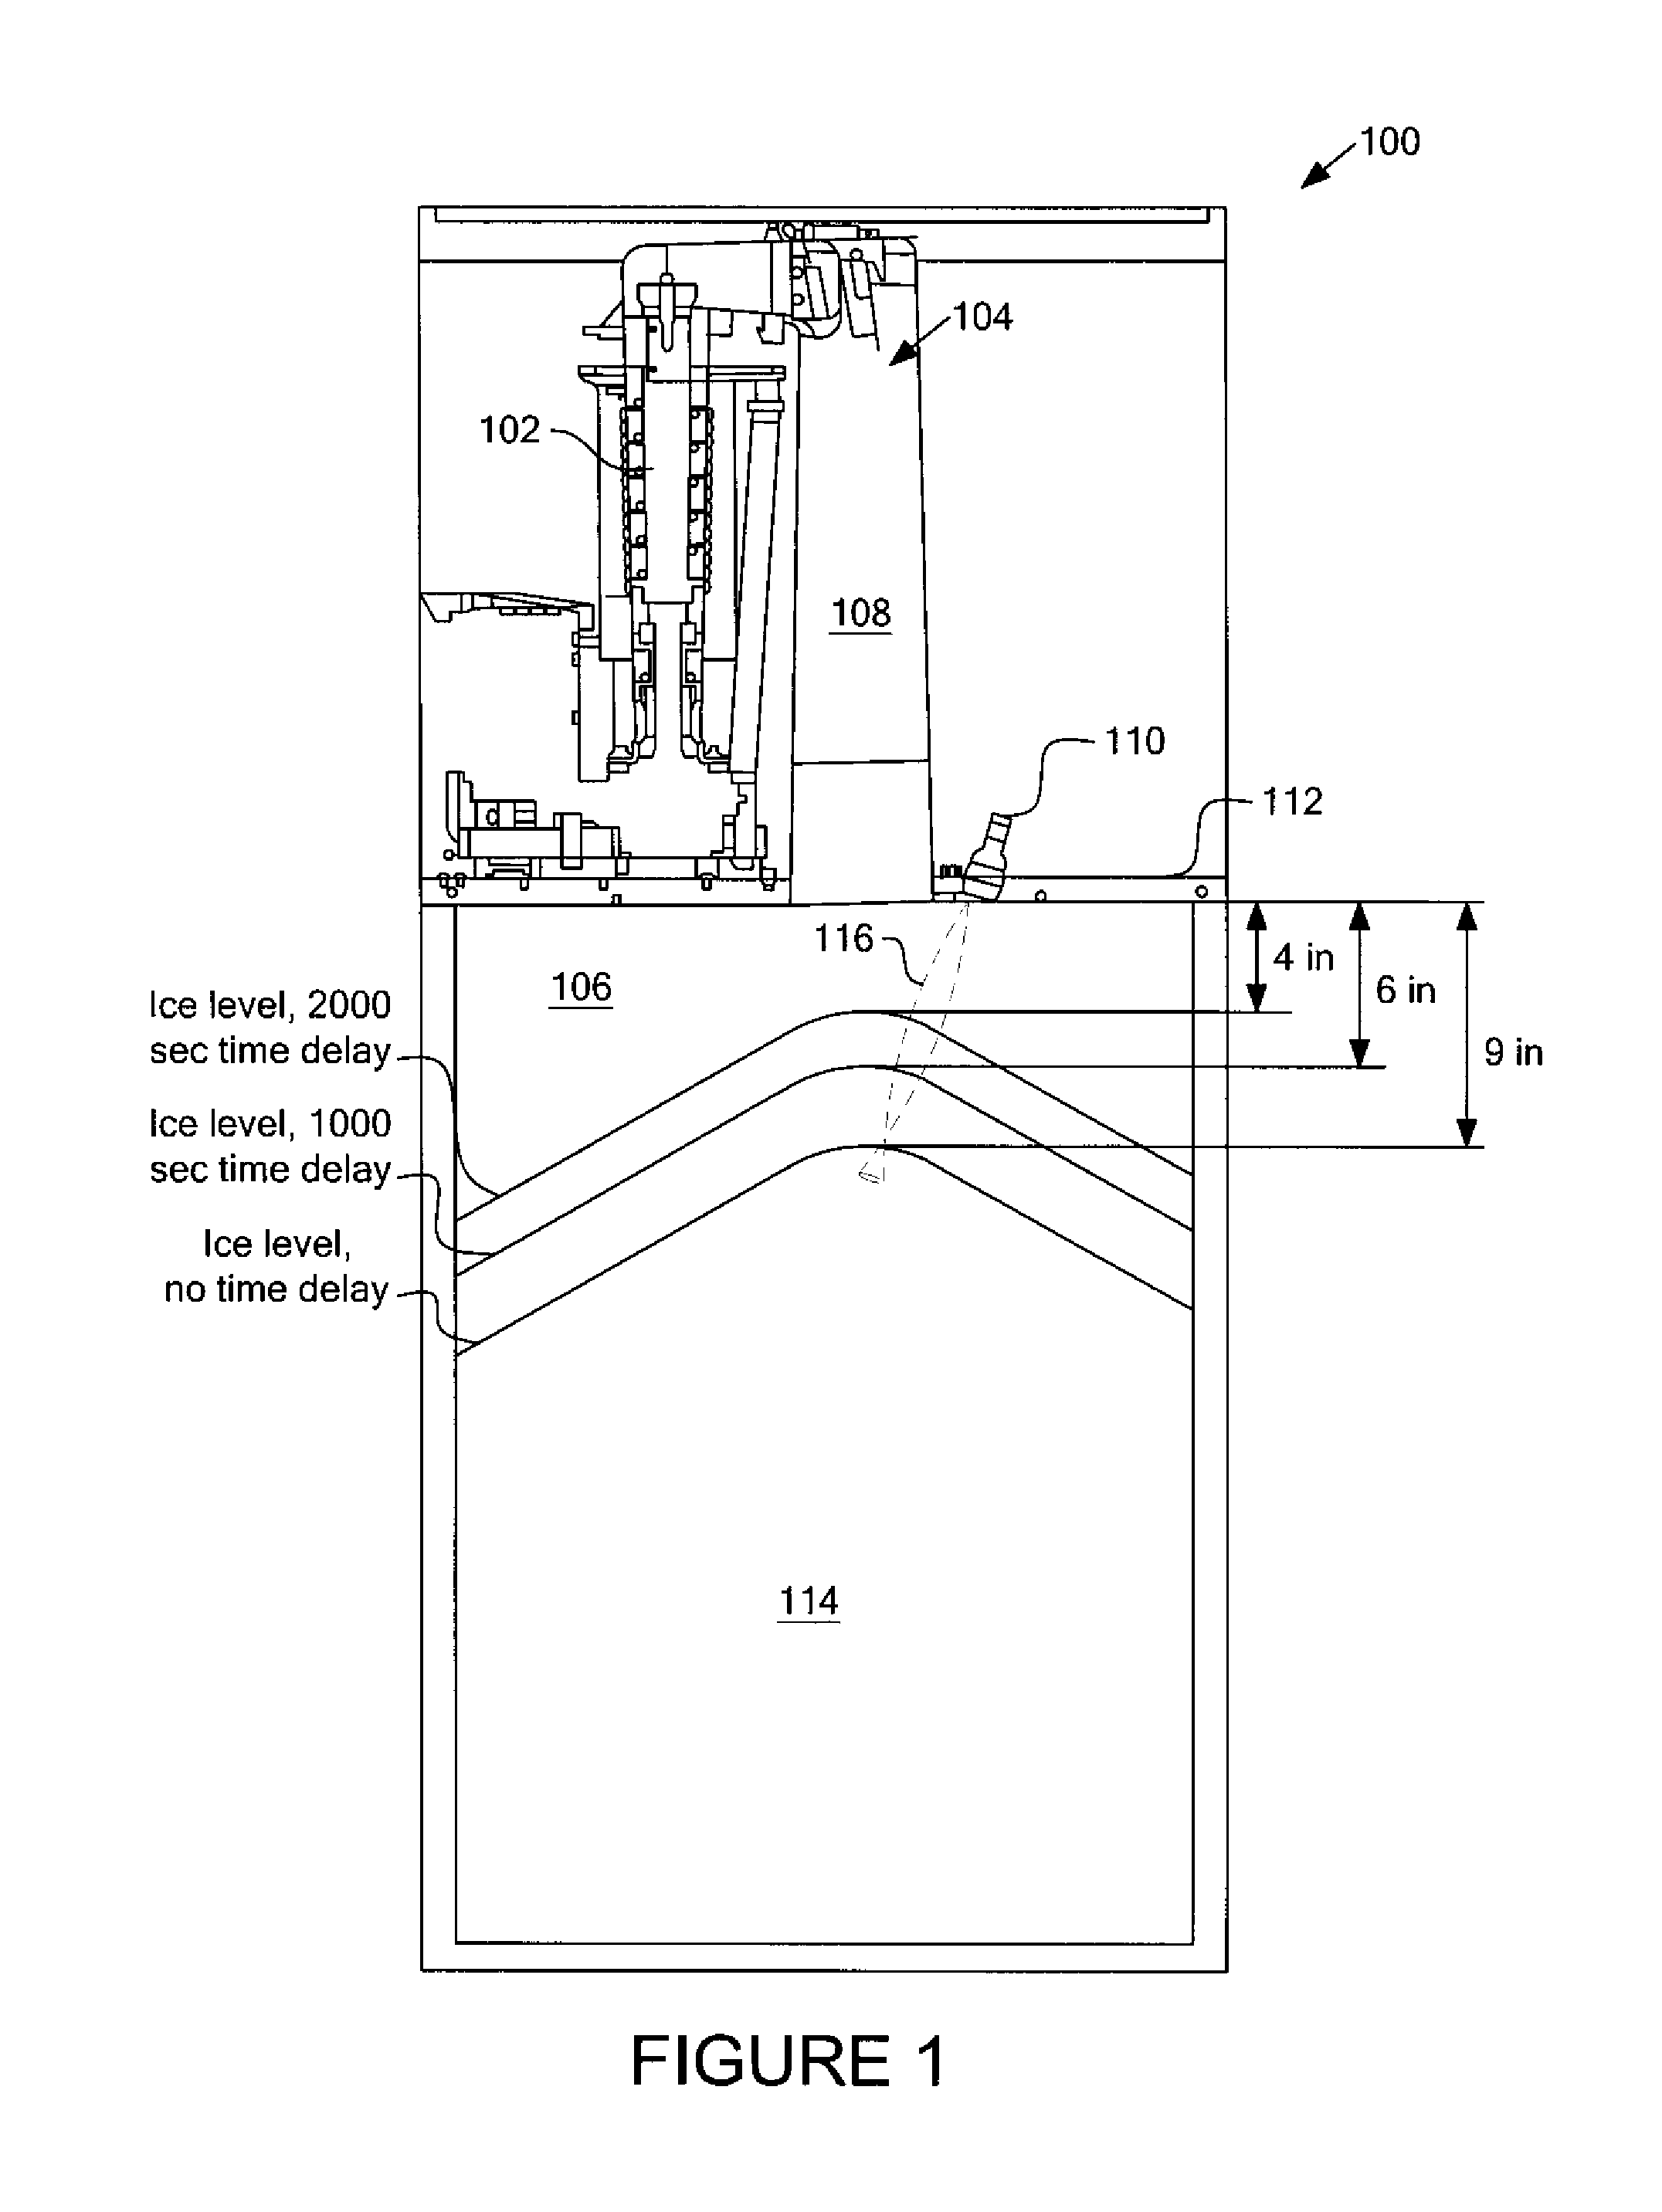 Systems and methods for providing an ice storage bin control sensor and housing